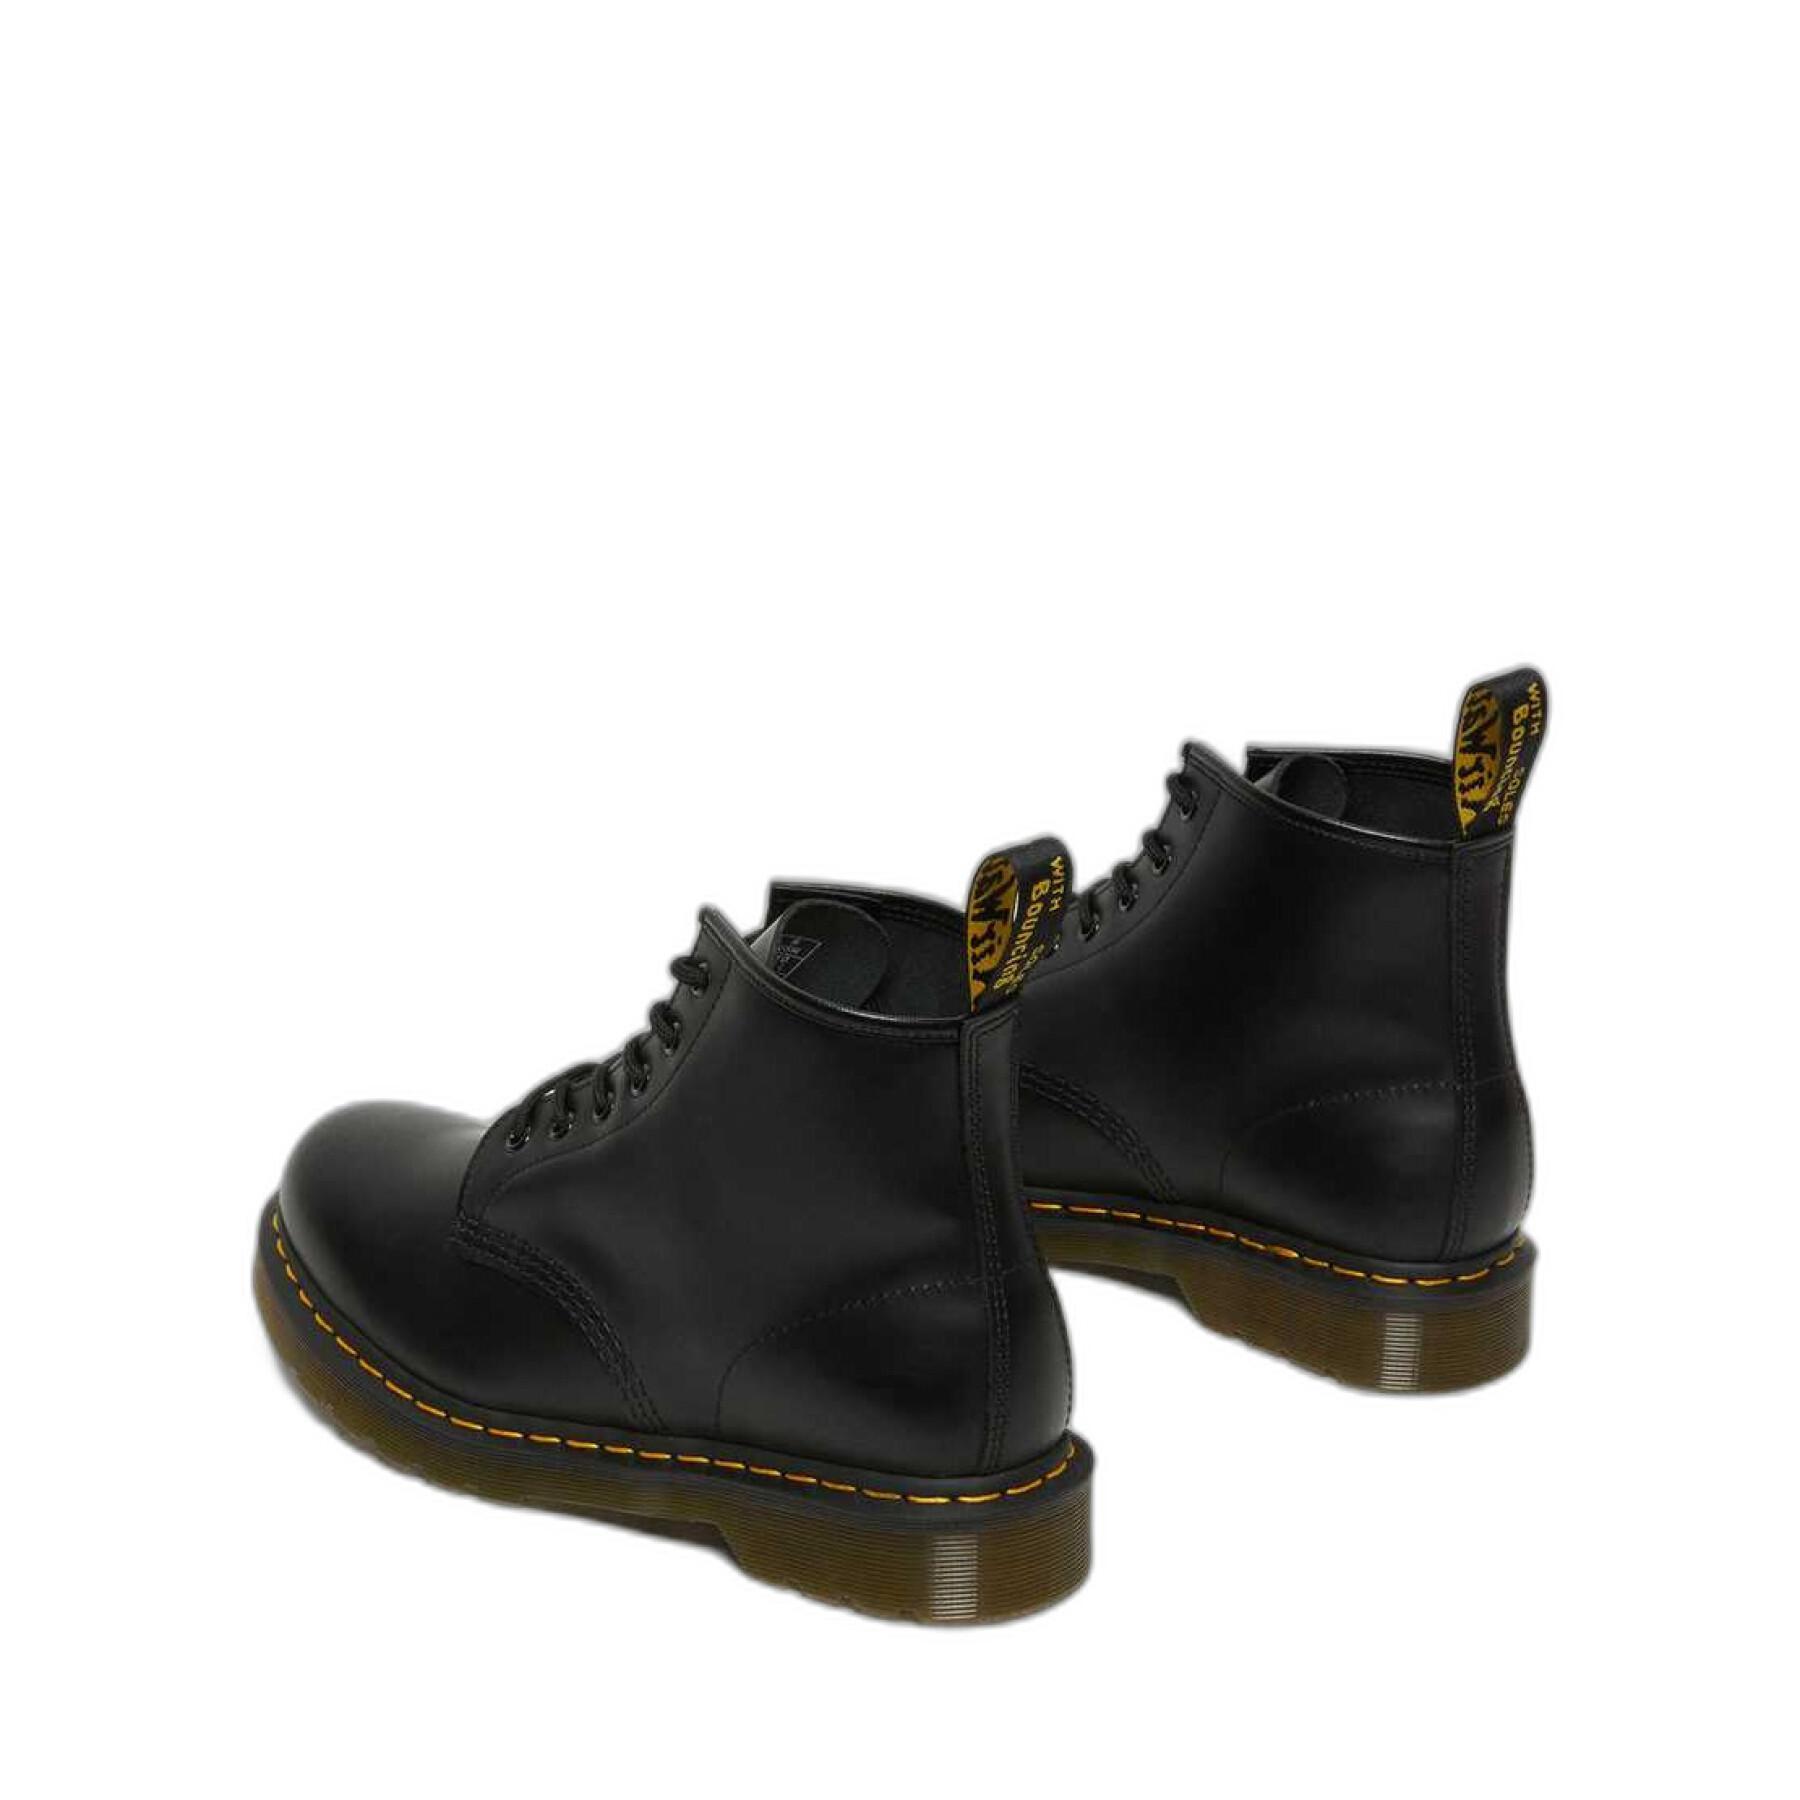 Bottines Dr Martens 101 Smooth Lace Up